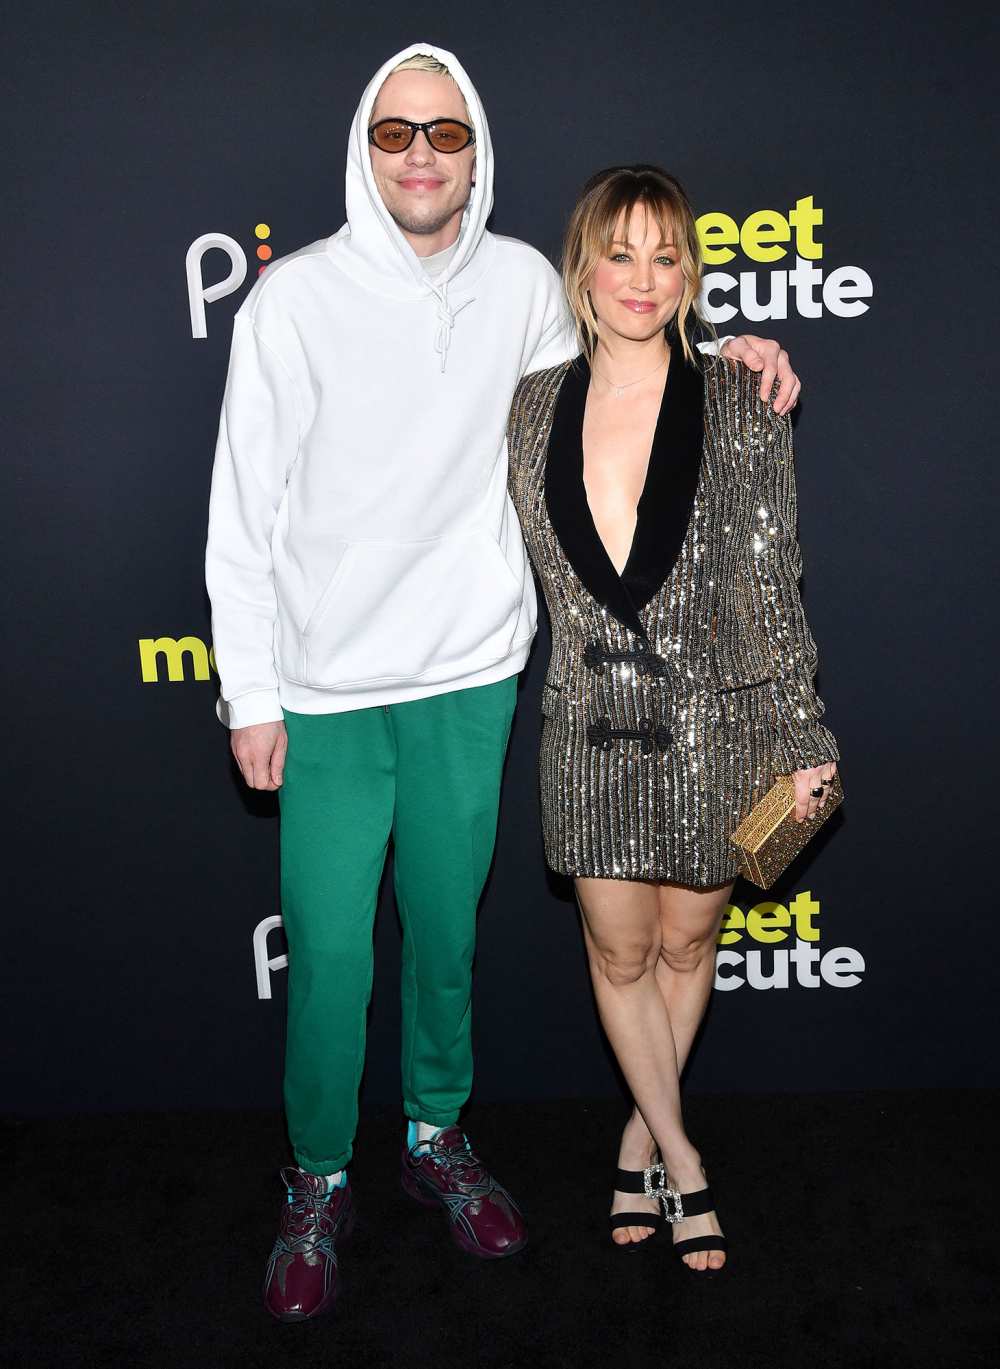 Feature Kaley Cuoco Teases Pete Davidson for Wearing a Hoodie to Meet Cute Premiere